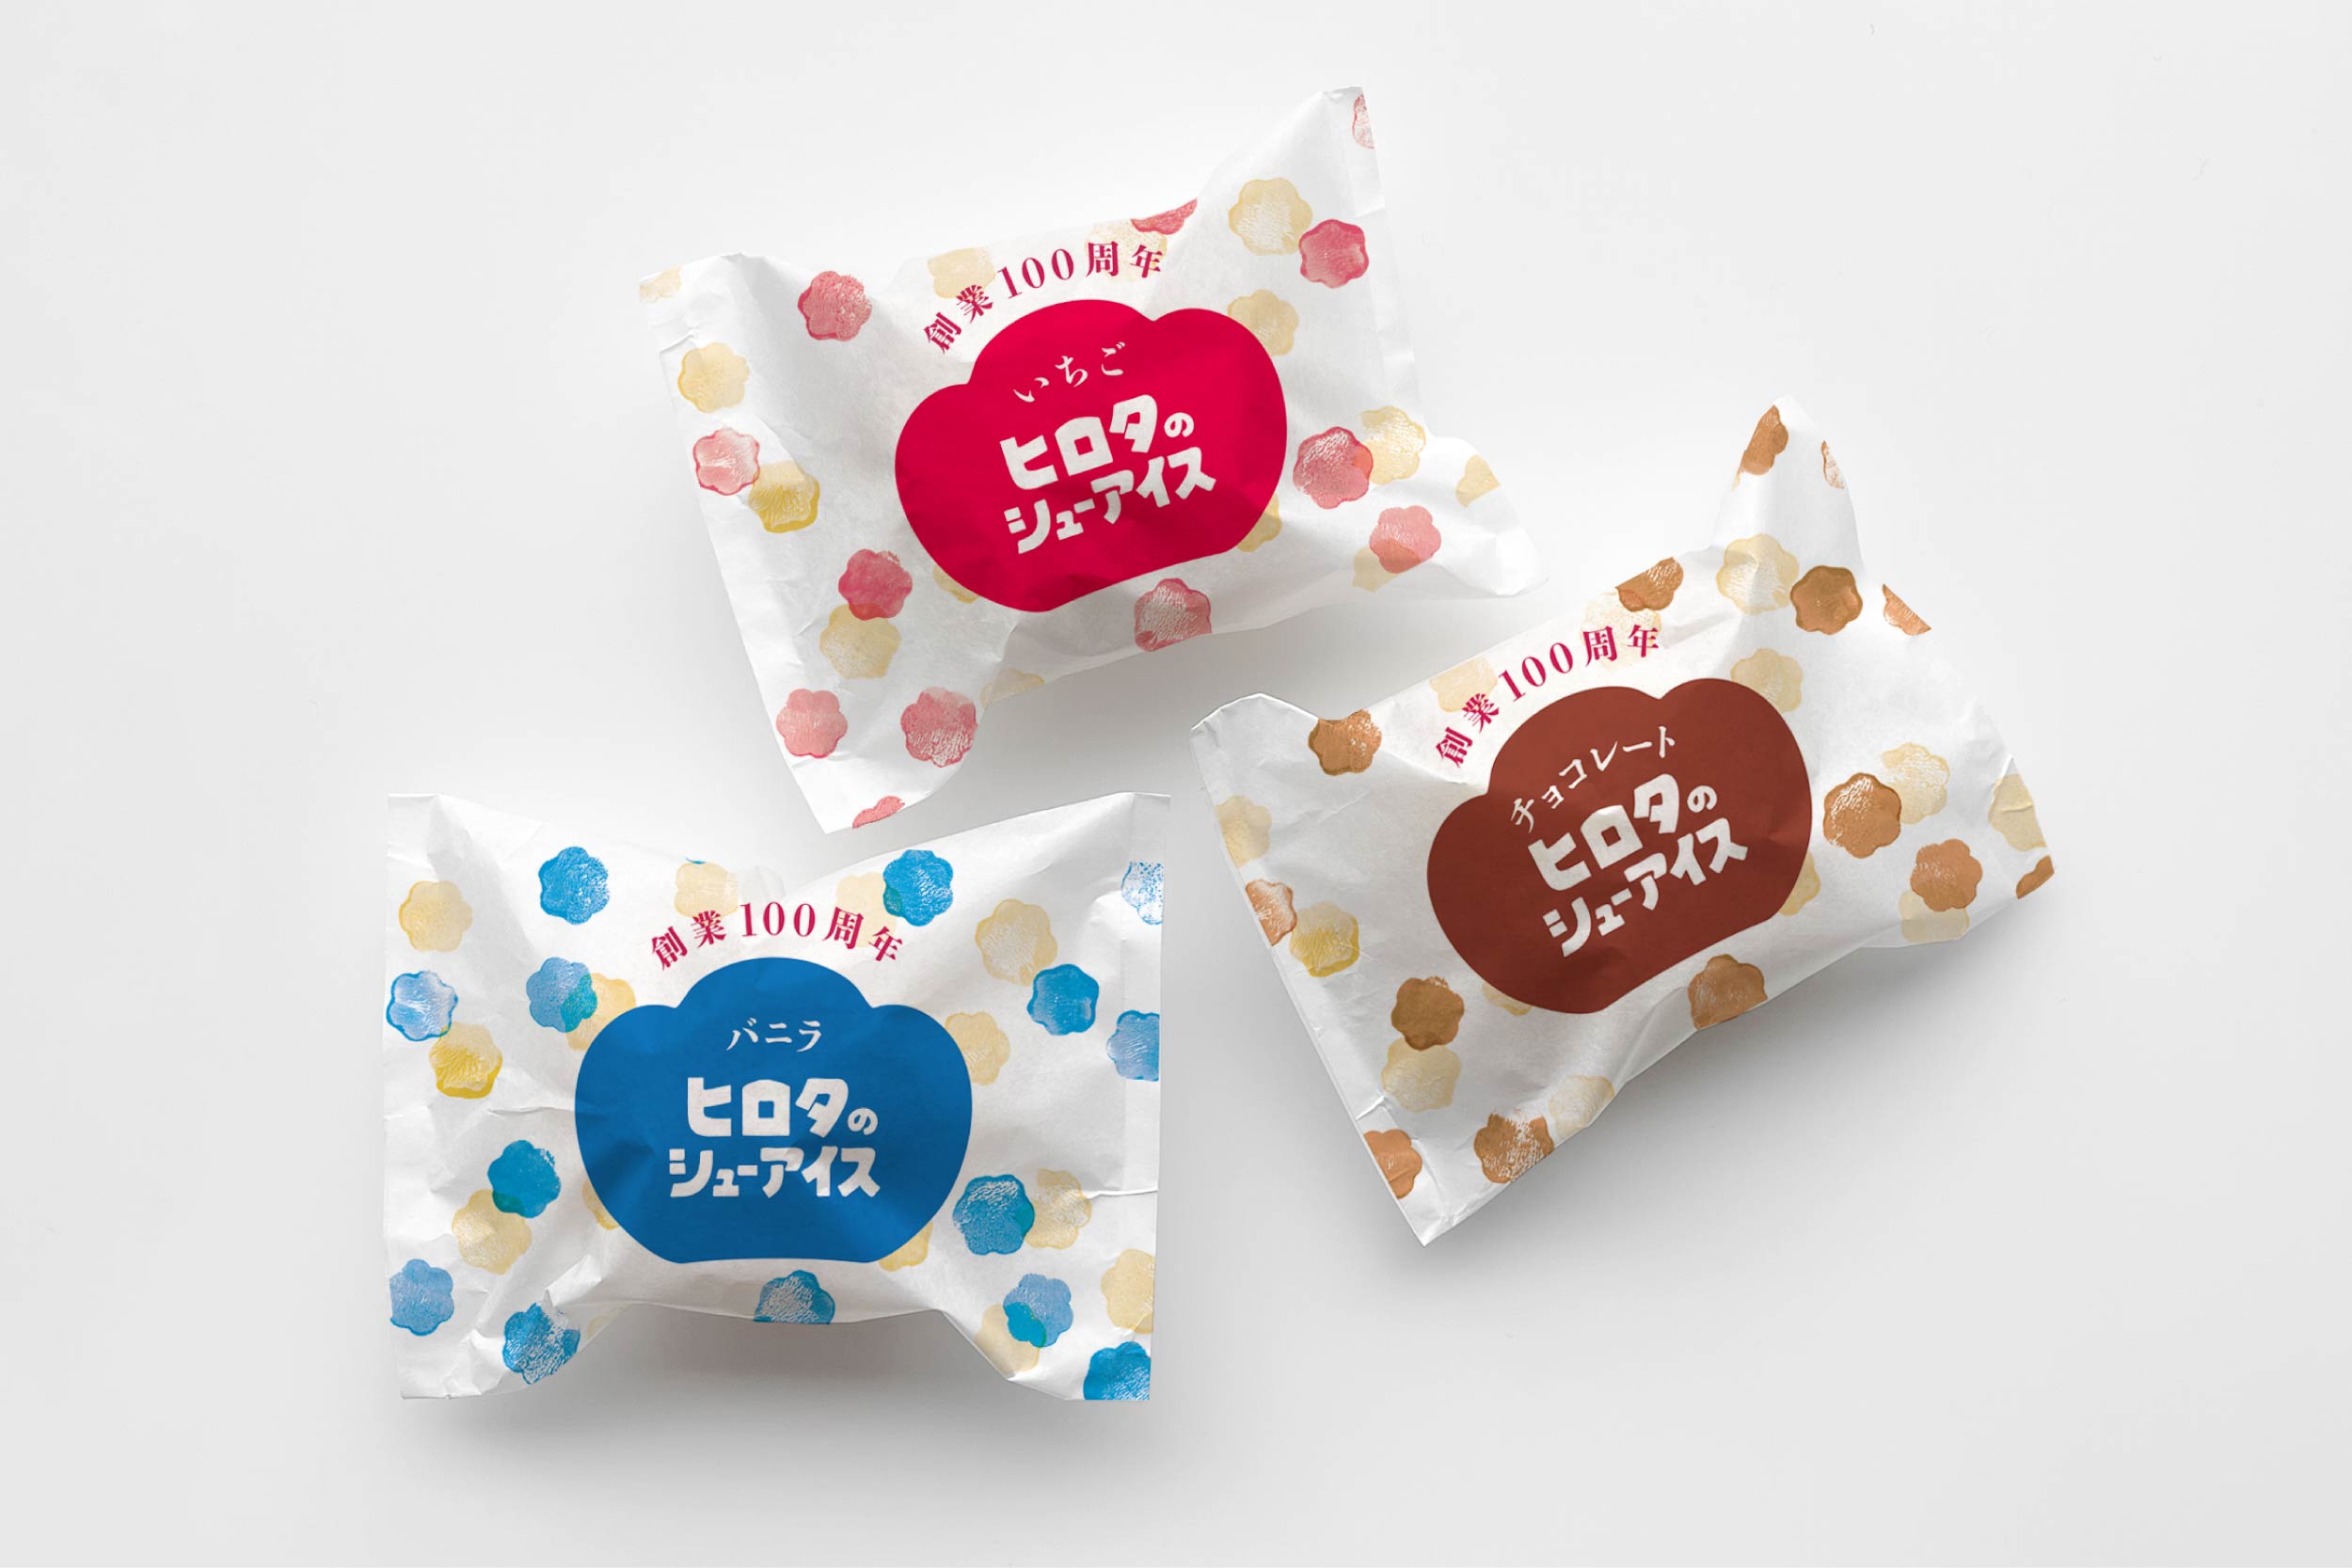 Cream puff Hirota is rebranding for its 100th anniversary! Opening flagship  stores in Tokyo and Osaka. All products are in 100th anniversary  specifications to express our gratitude for 100 years.